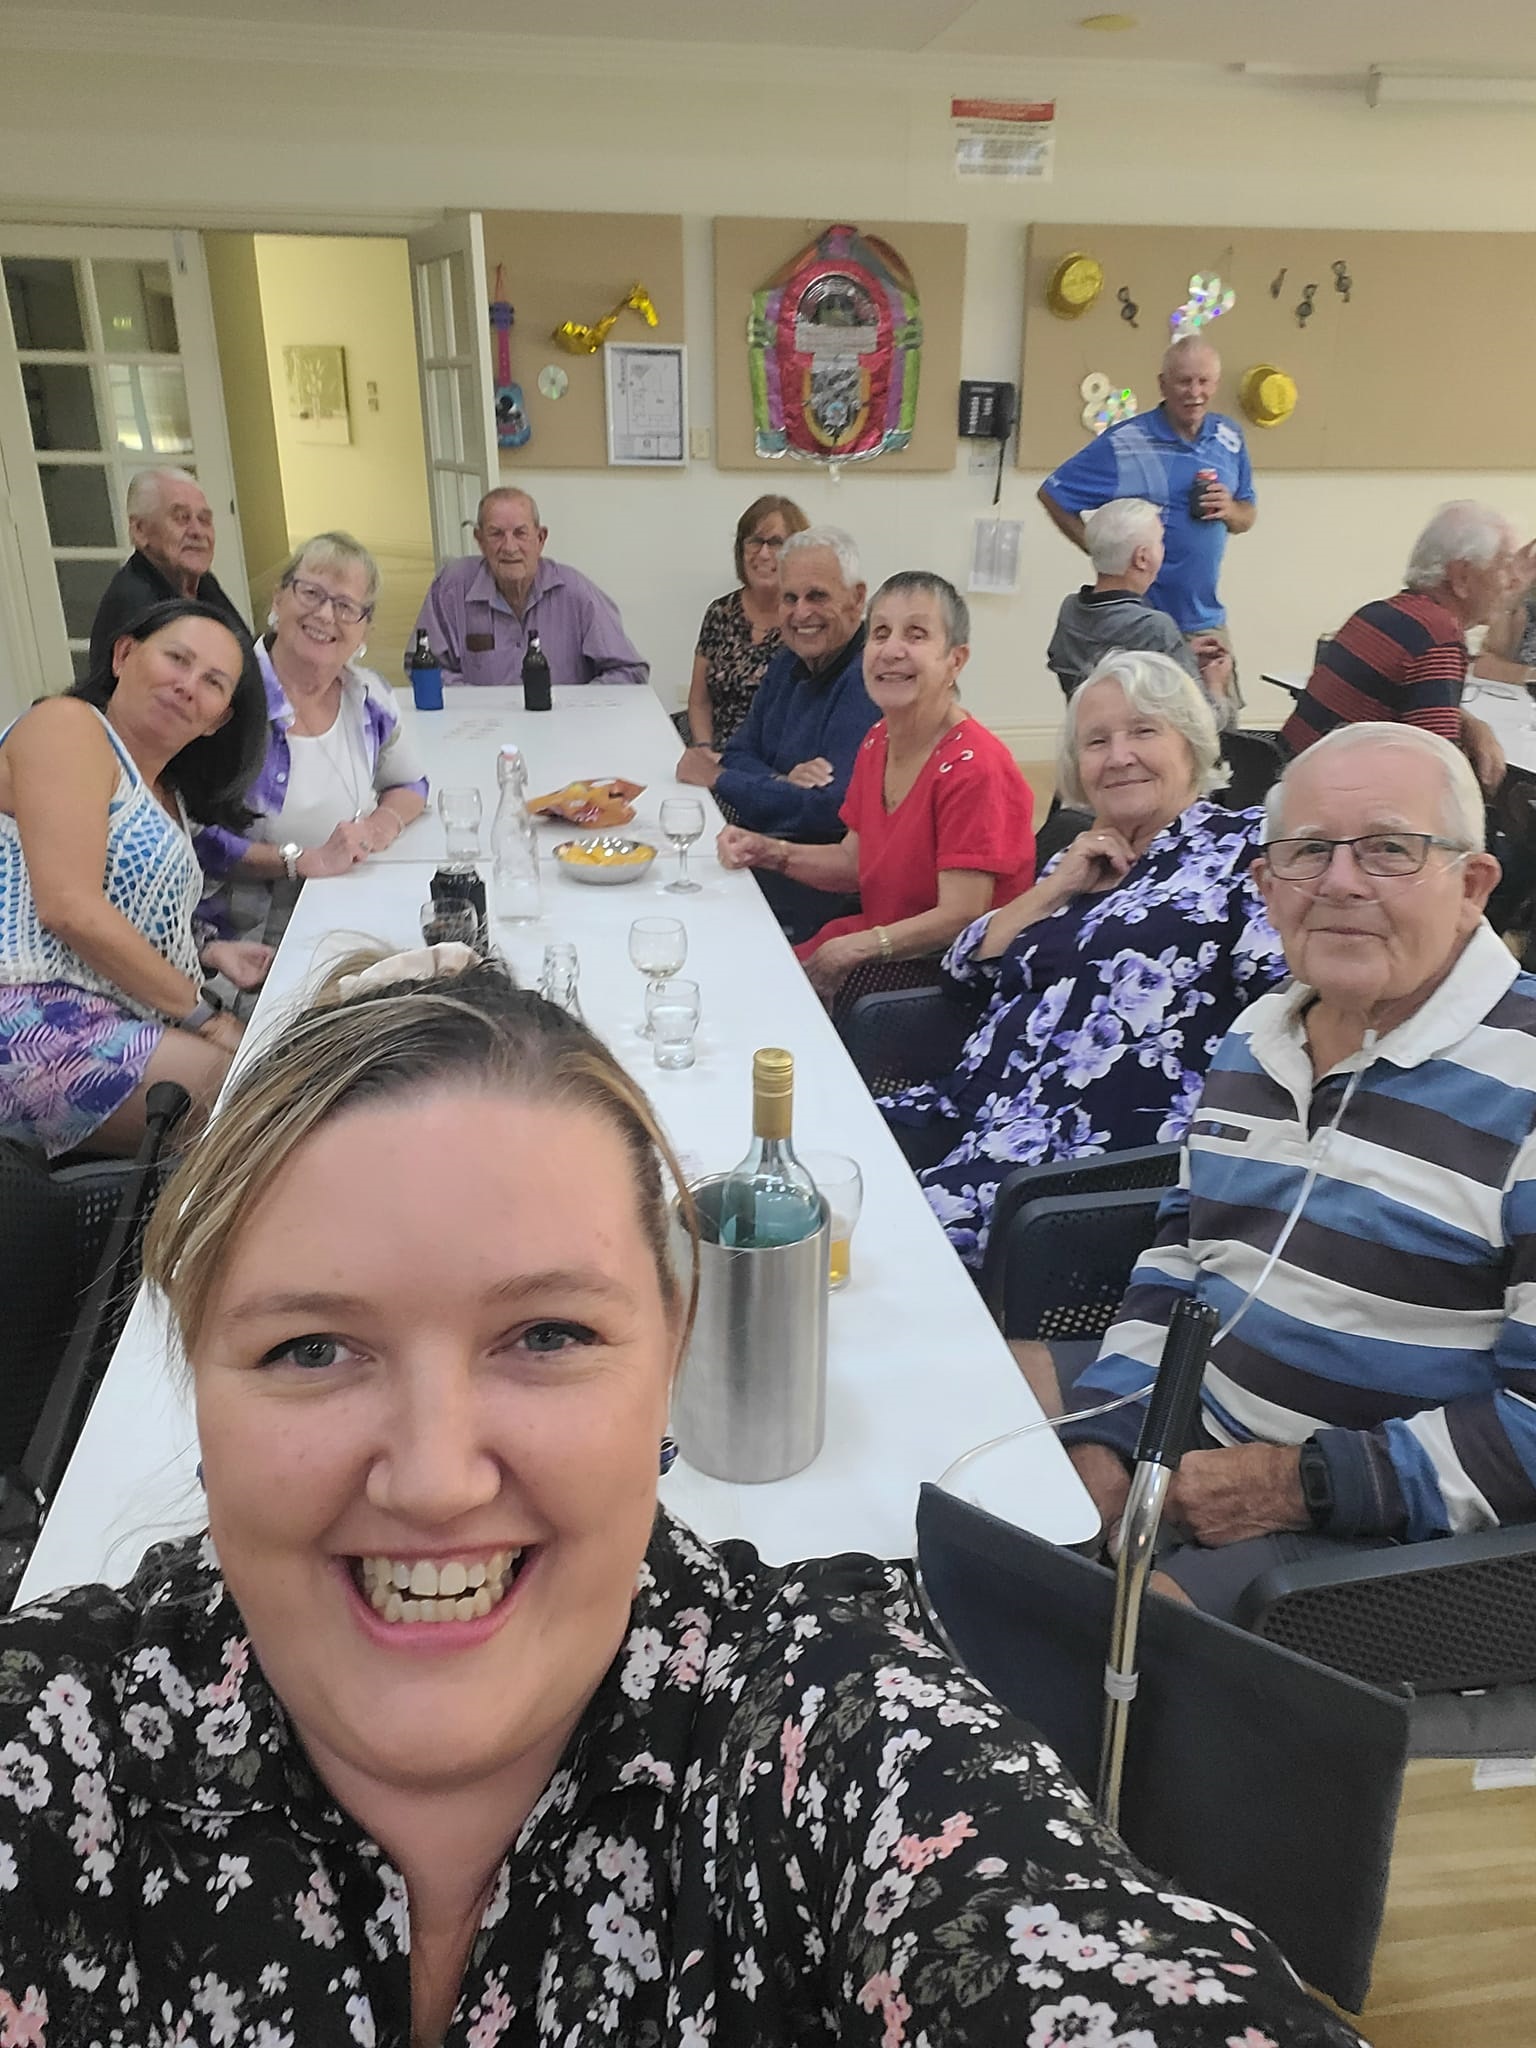 Lauren Jew smiles in a selfie with a community group seated at a table behind her.